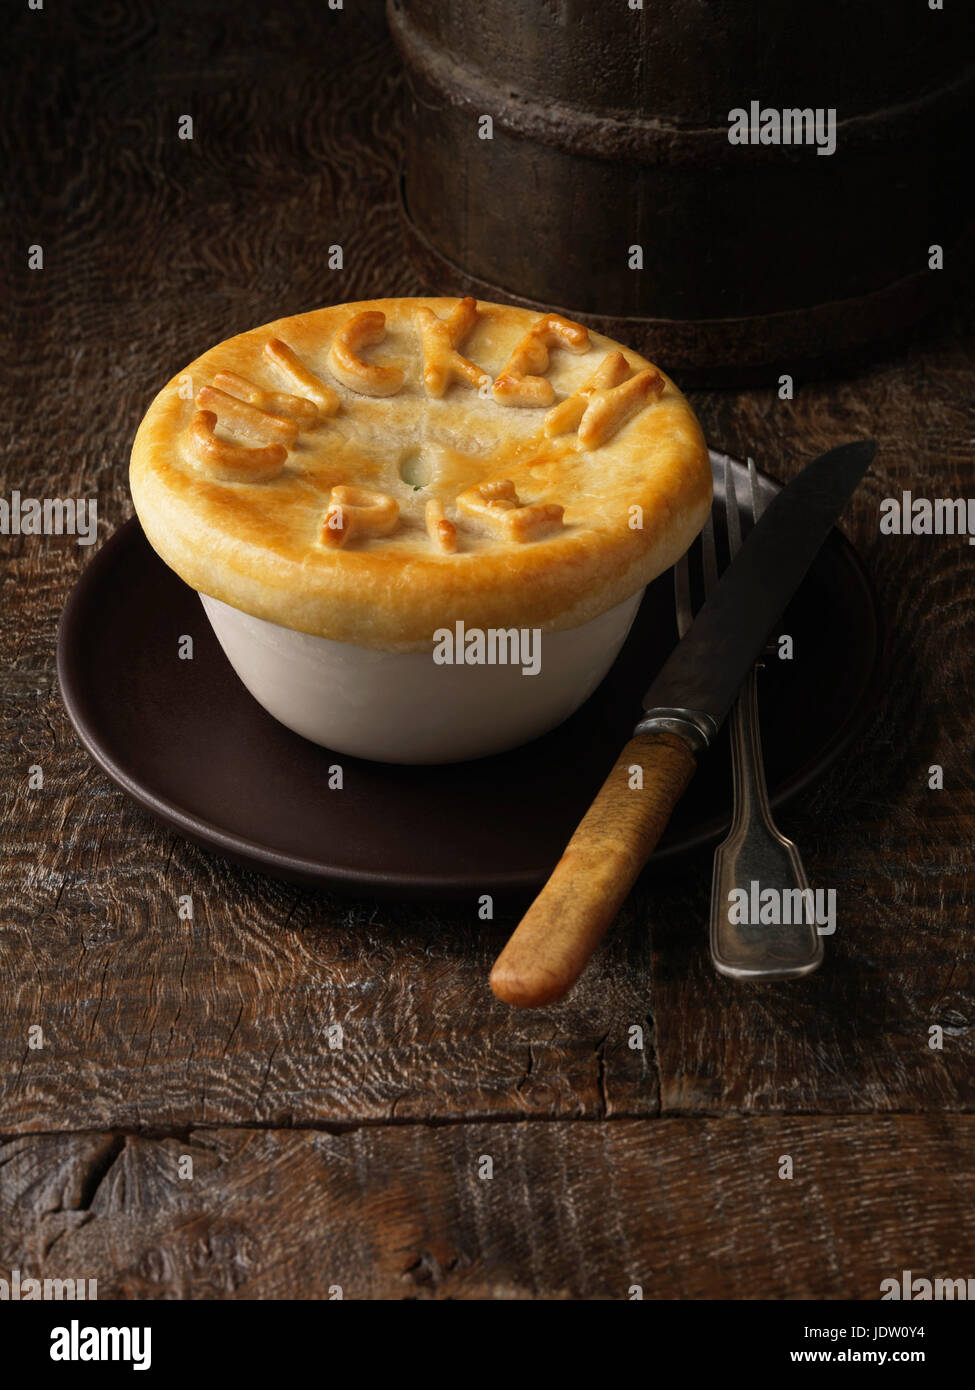 Plate of chicken pies Stock Photo